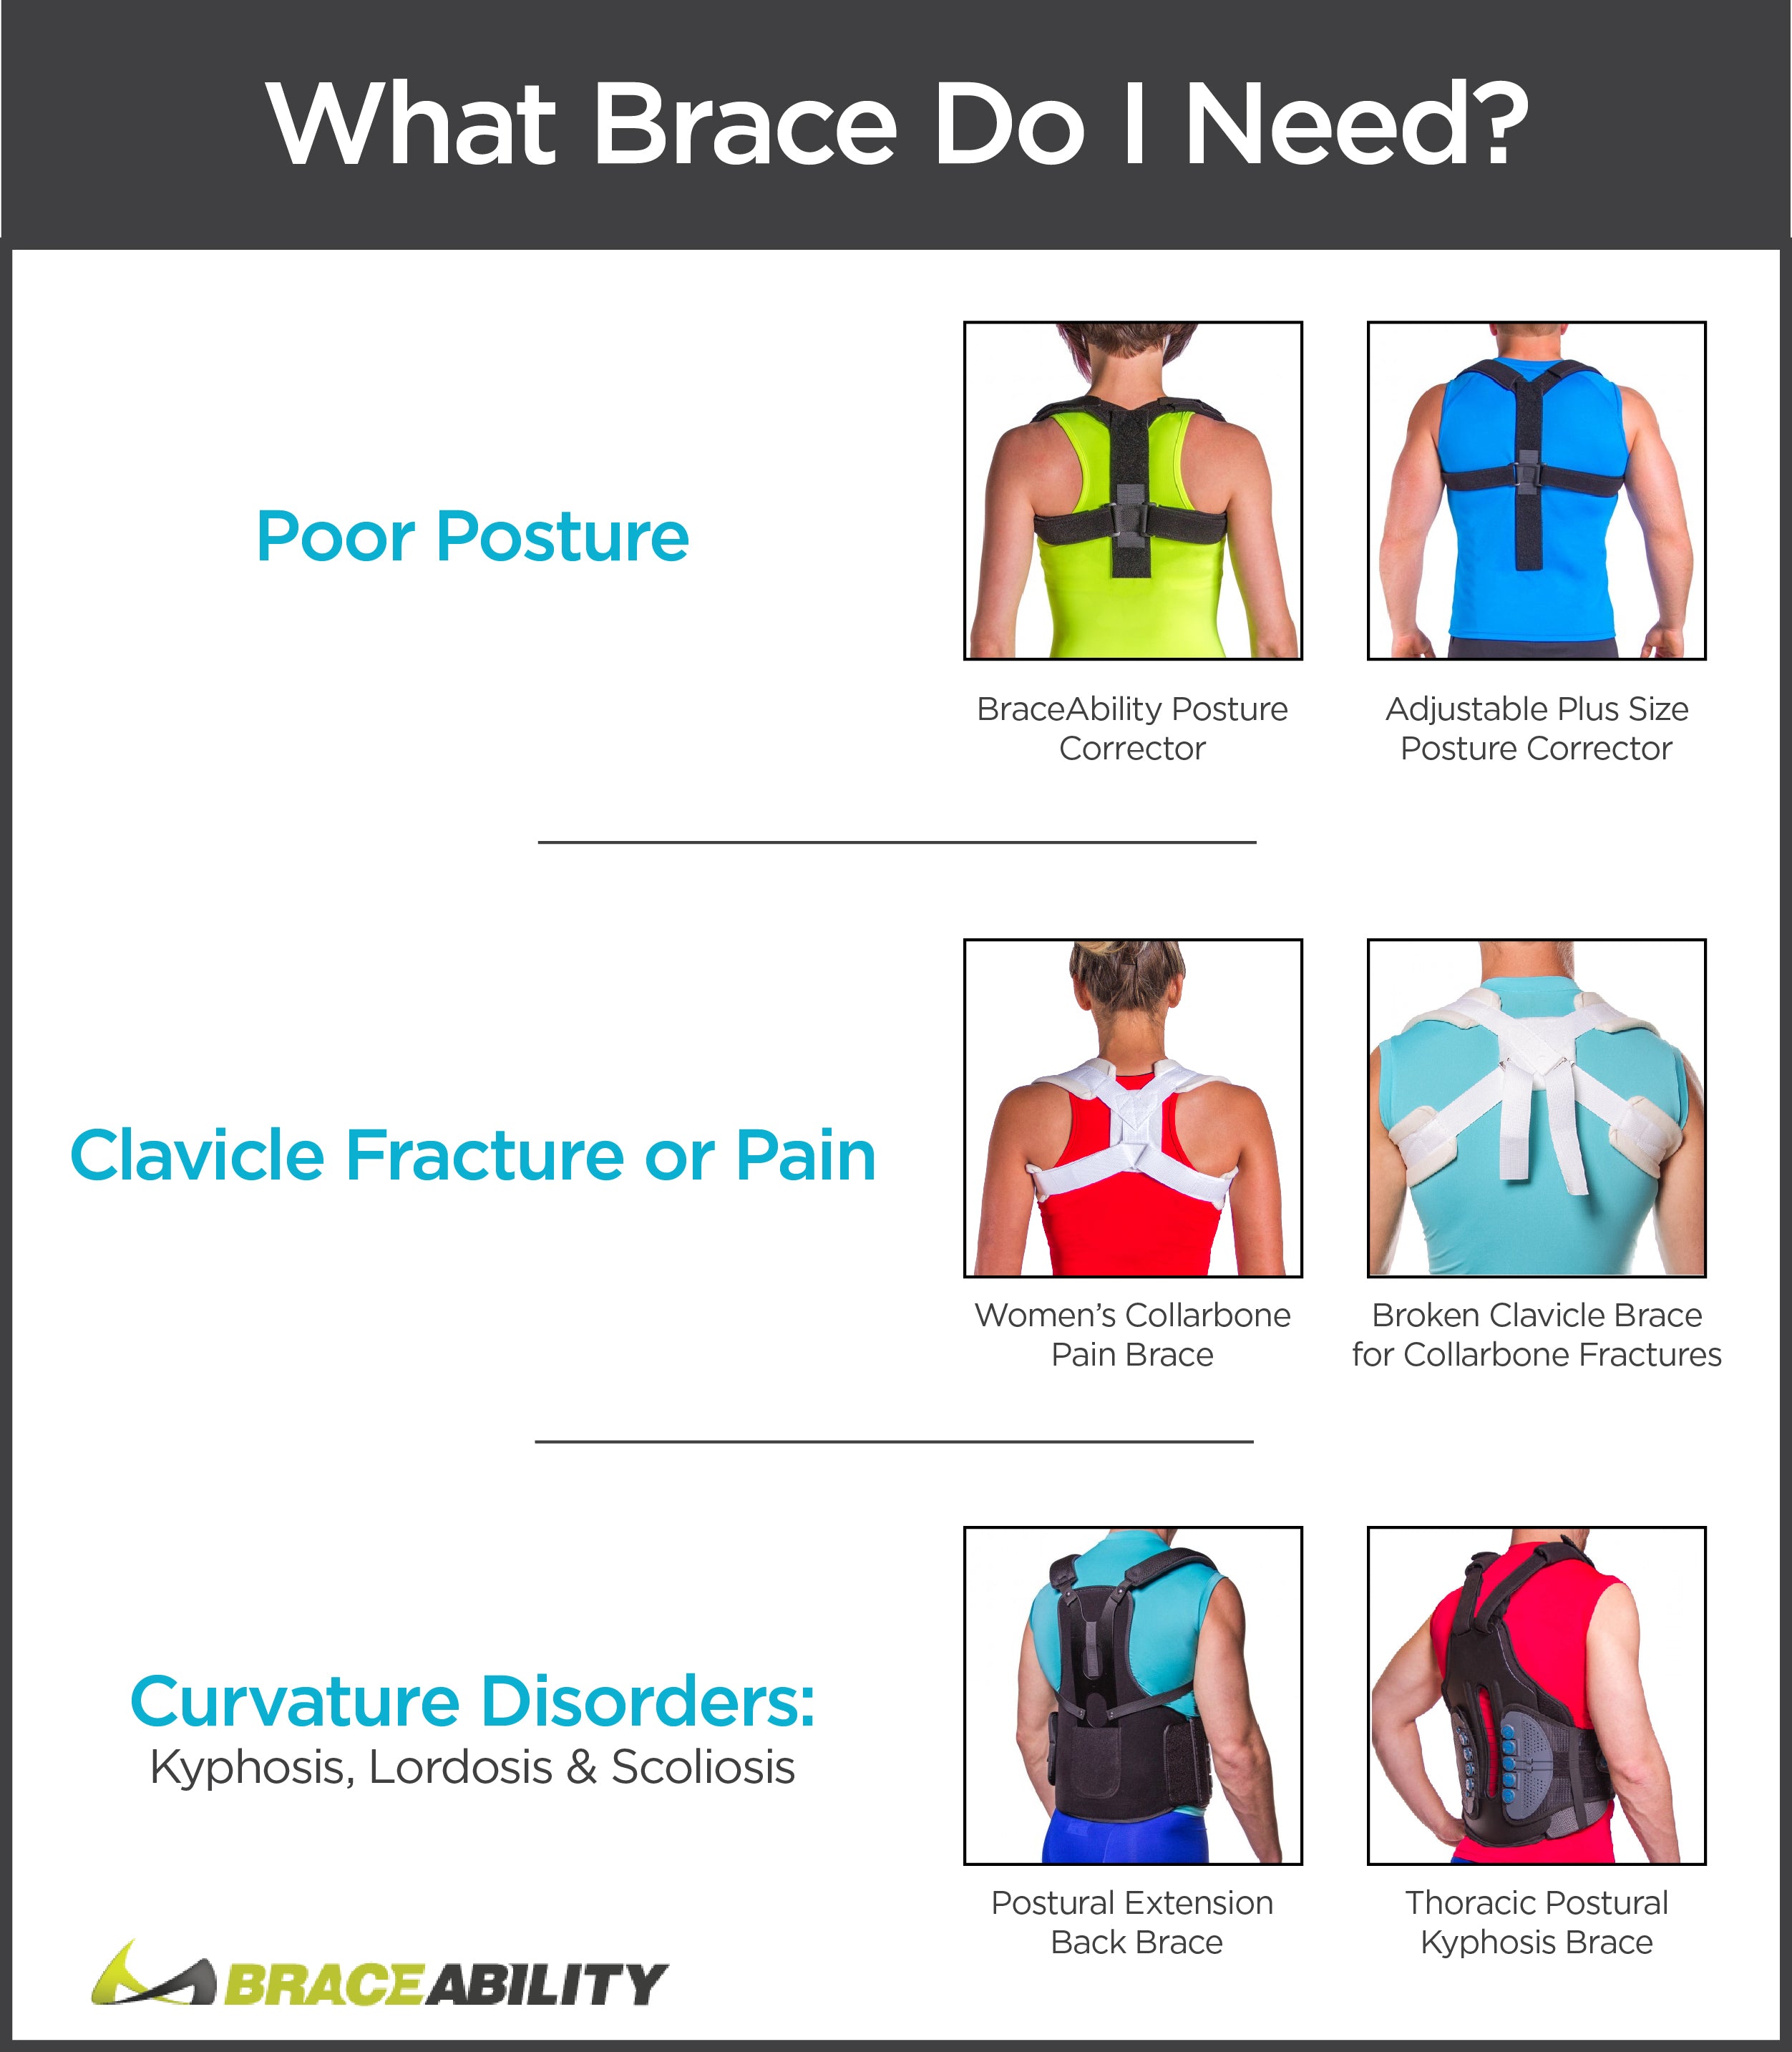 Find out what type of back straightener brace you need for your posture or curvature disorder